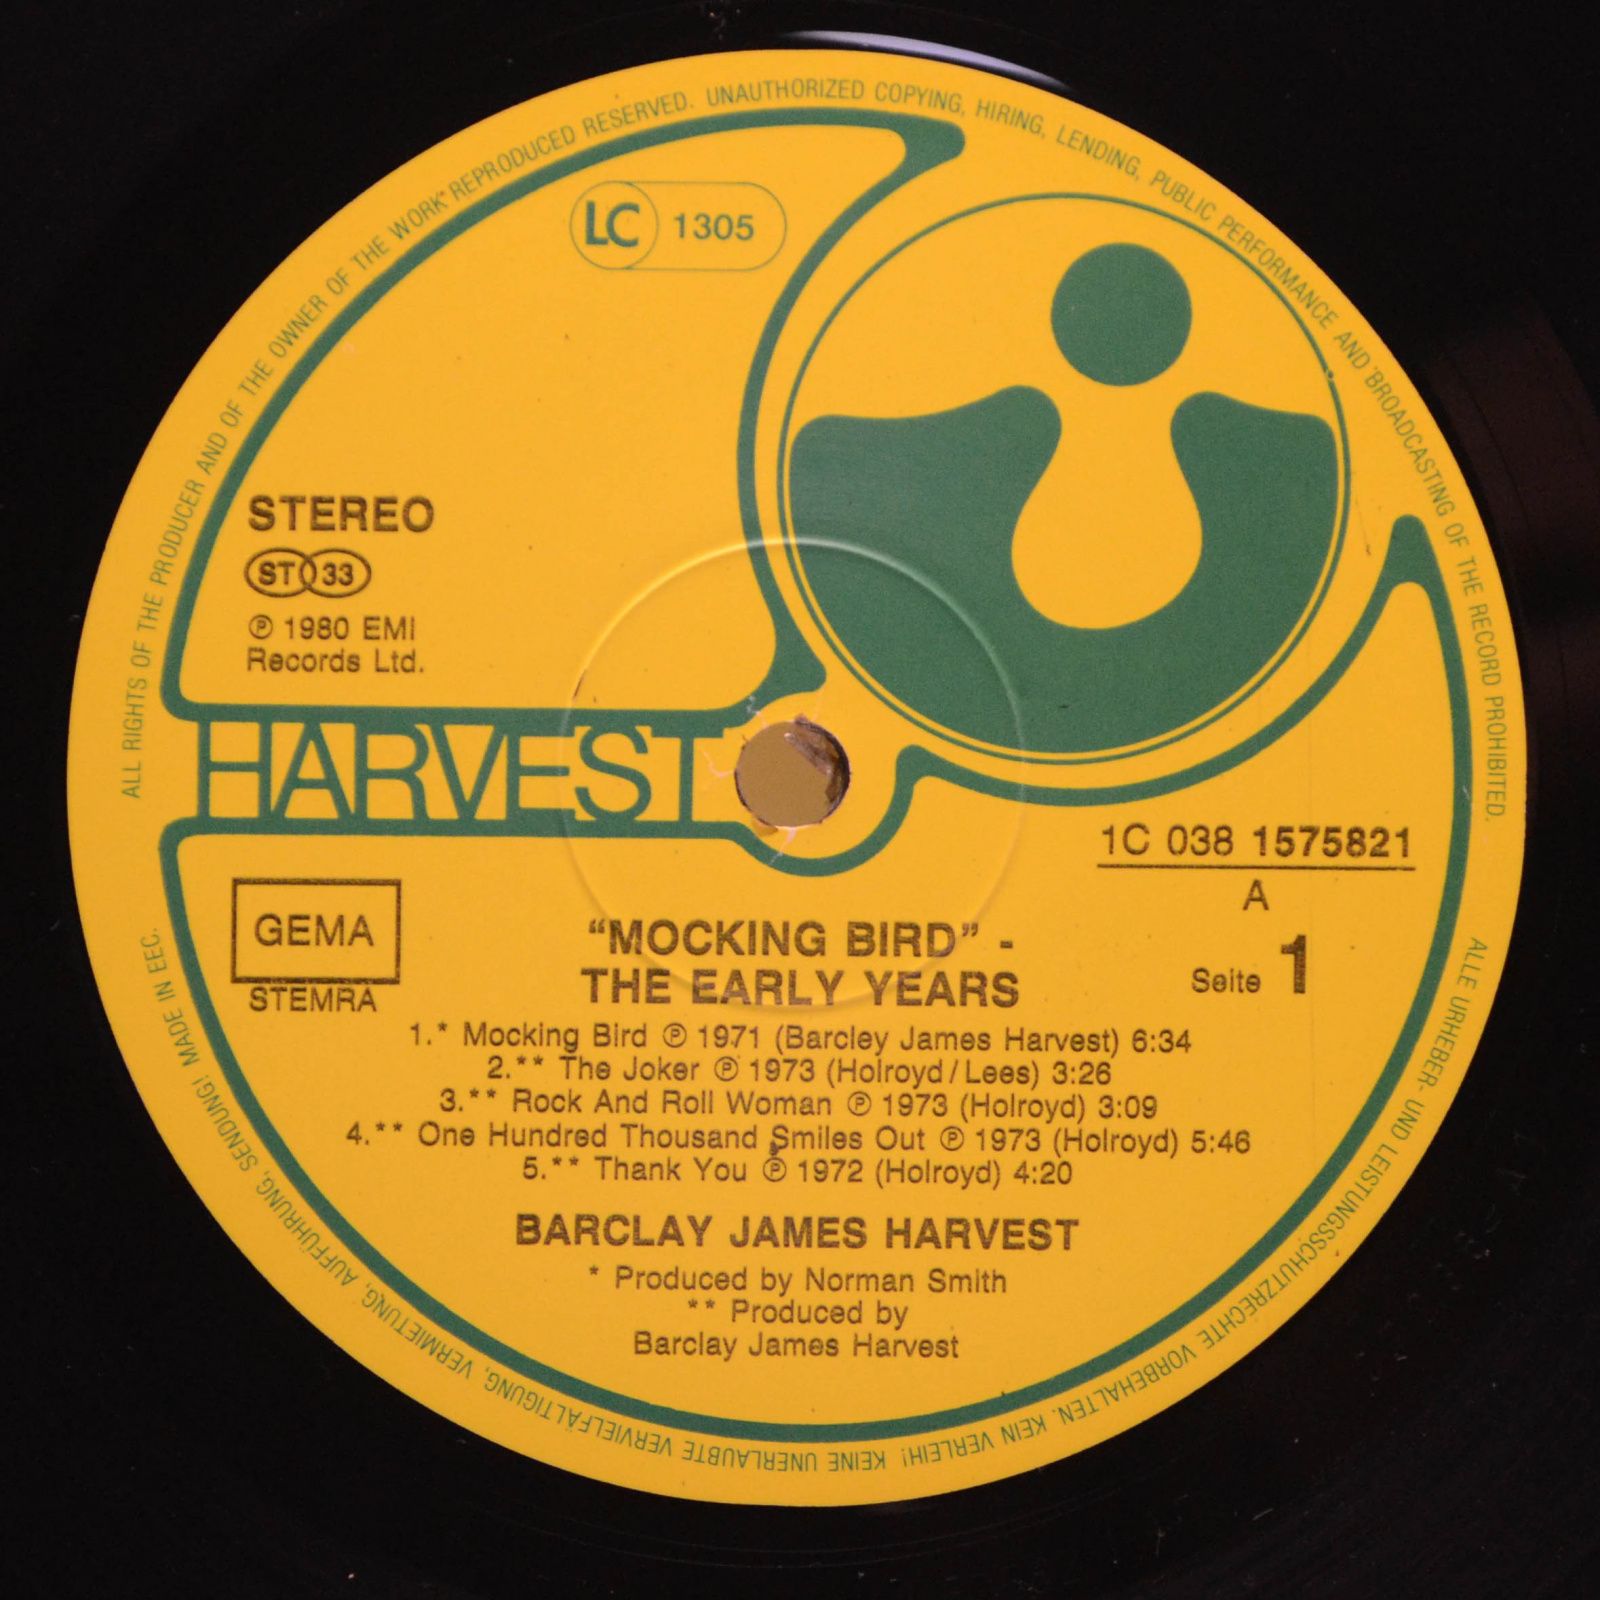 Barclay James Harvest — Mocking Bird (The Early Years), 1980